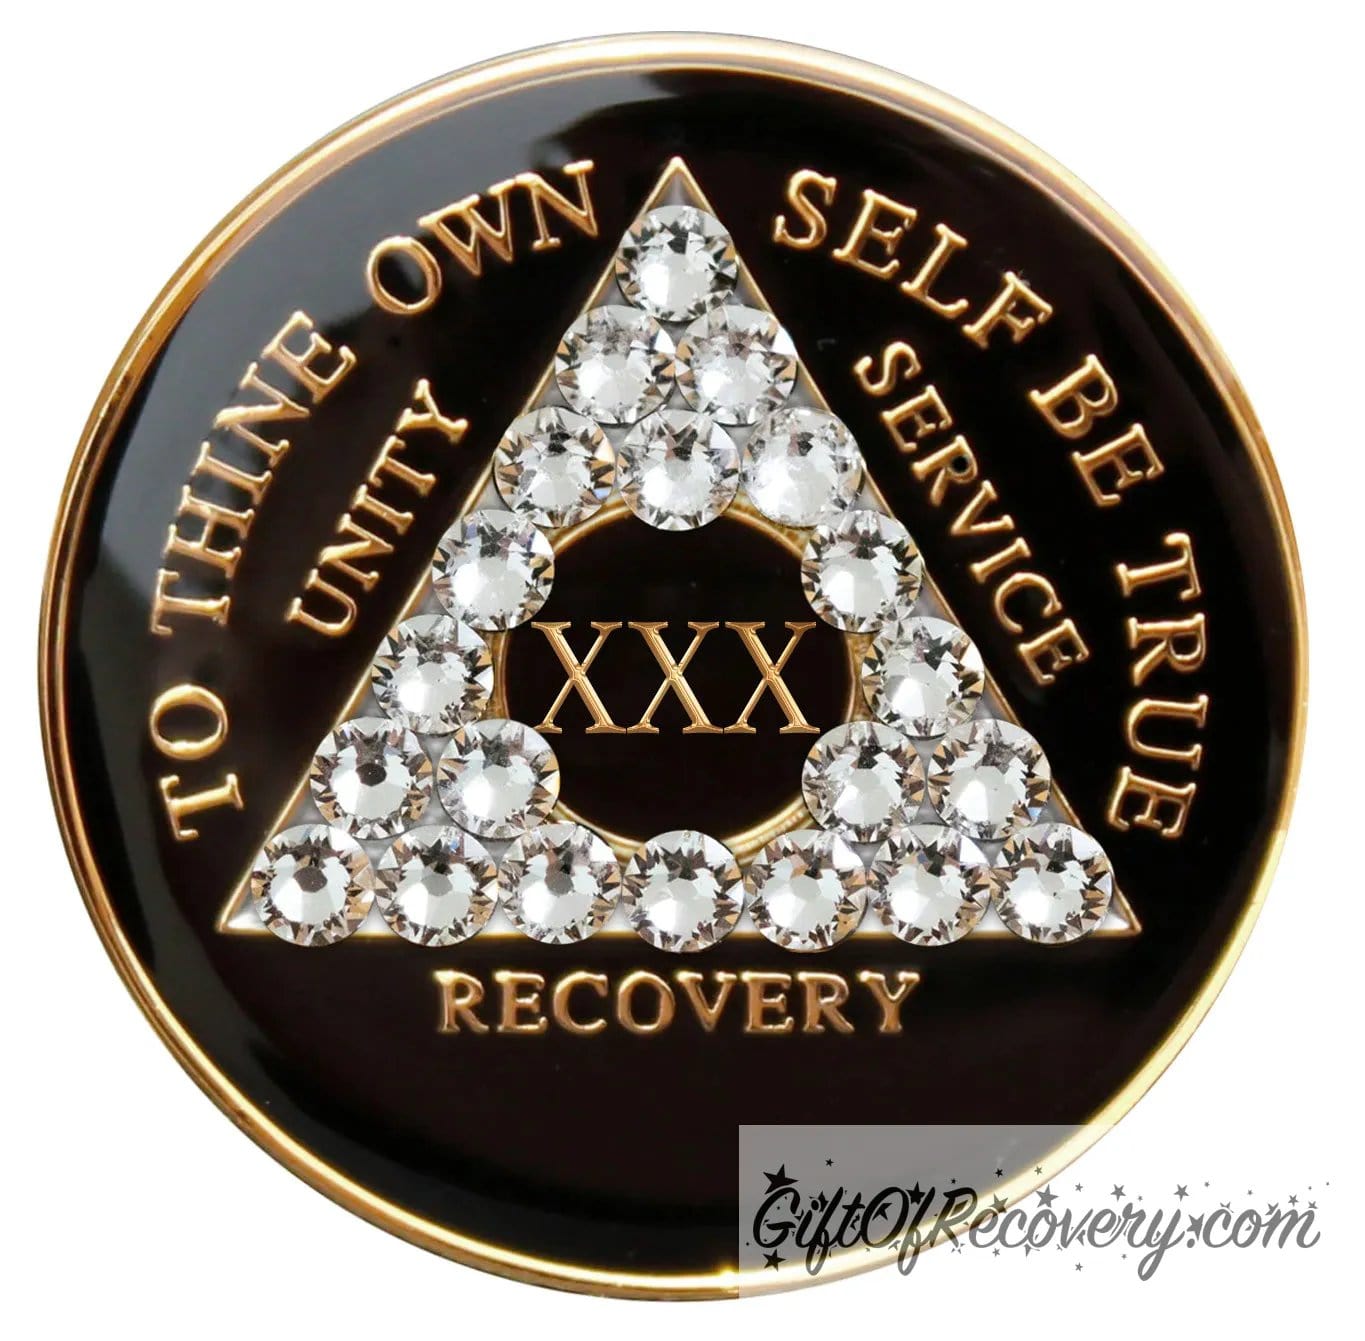 30 year AA medallion black onyx with 21 clear genuine crystals in the shape of the triangle, to thine own self be true, unity, service, recovery, and the roman numeral are embossed with 14k gold-plated brass, the recovery medallion is sealed with resin for a glossy finish that will last and is scratch proof.